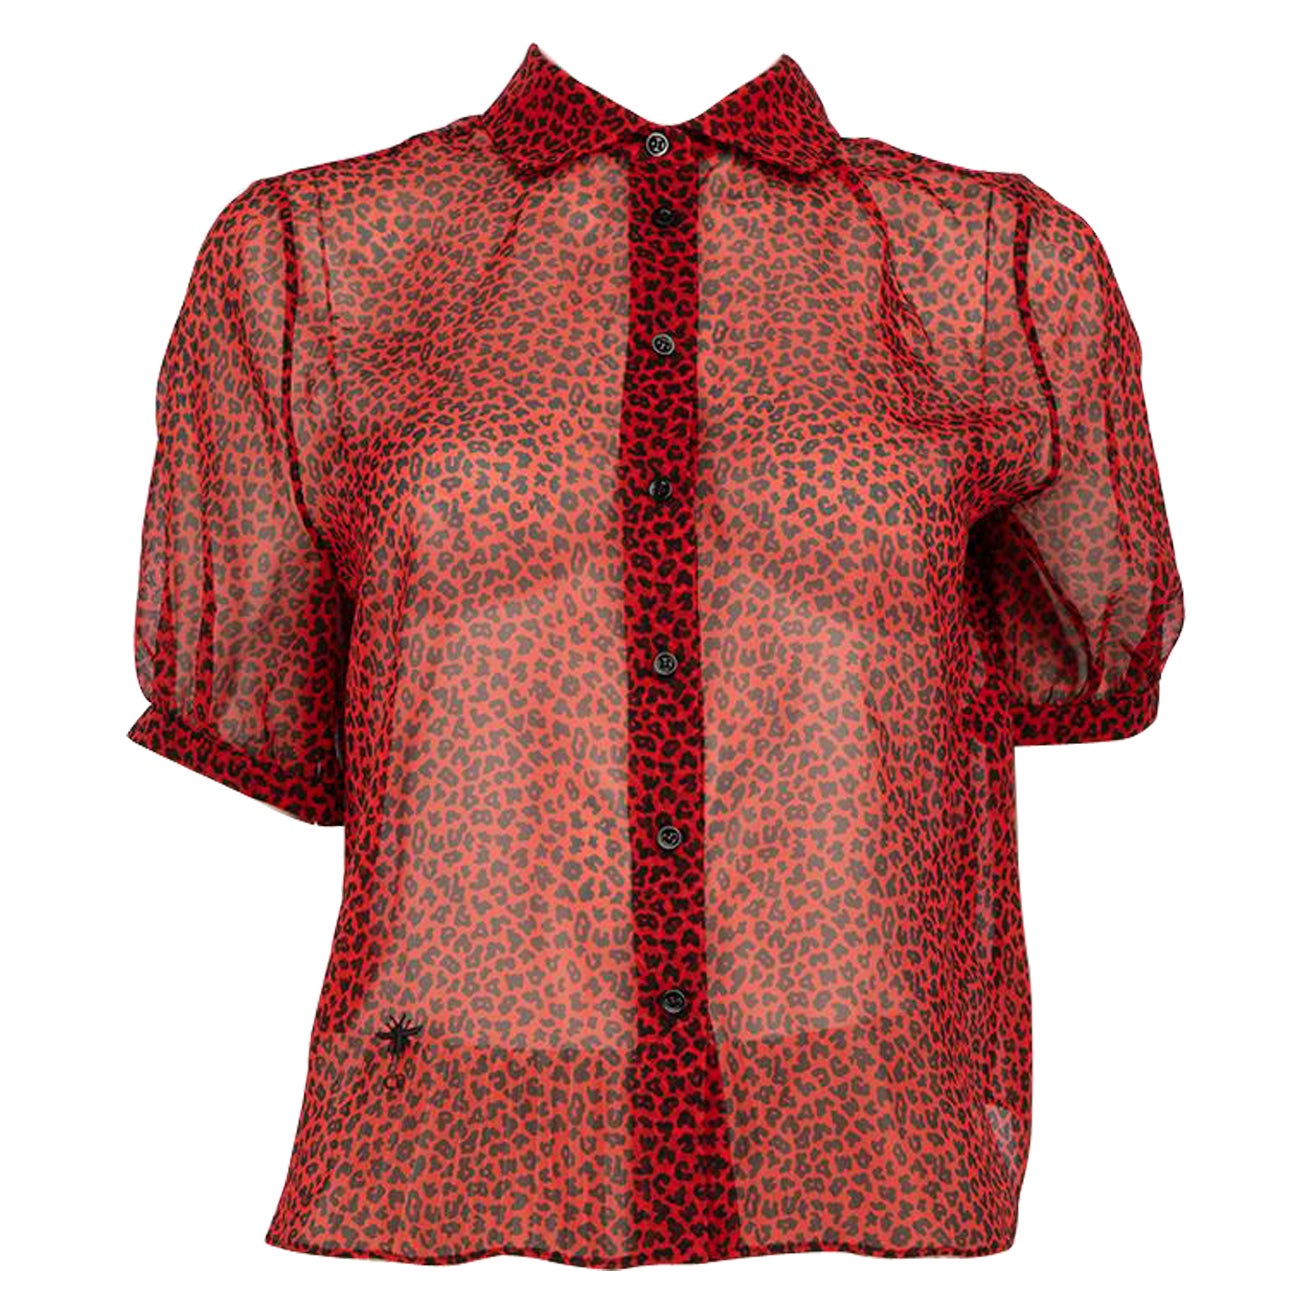 Dior Red Silk Leopard Print Sheer Blouse Size XS For Sale